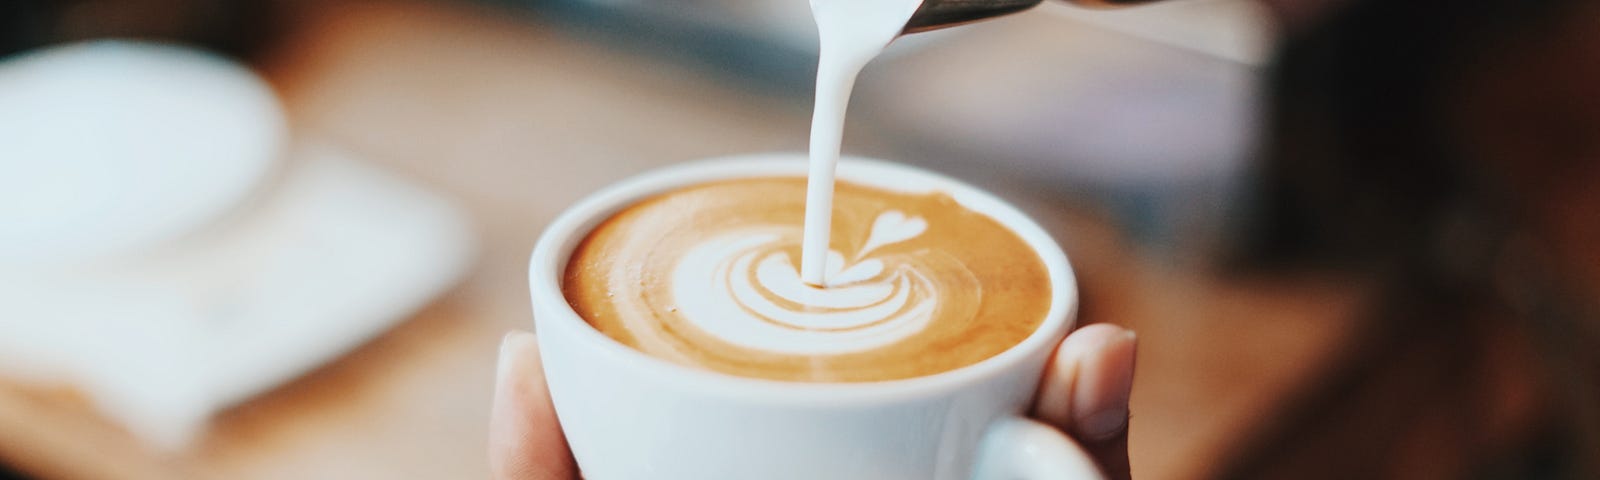 Photograph of milk being poured (out of a small steel container) into a small white cup. The pourer is creating a heart design in milk. Blurred background of a table with a cup and saucer.